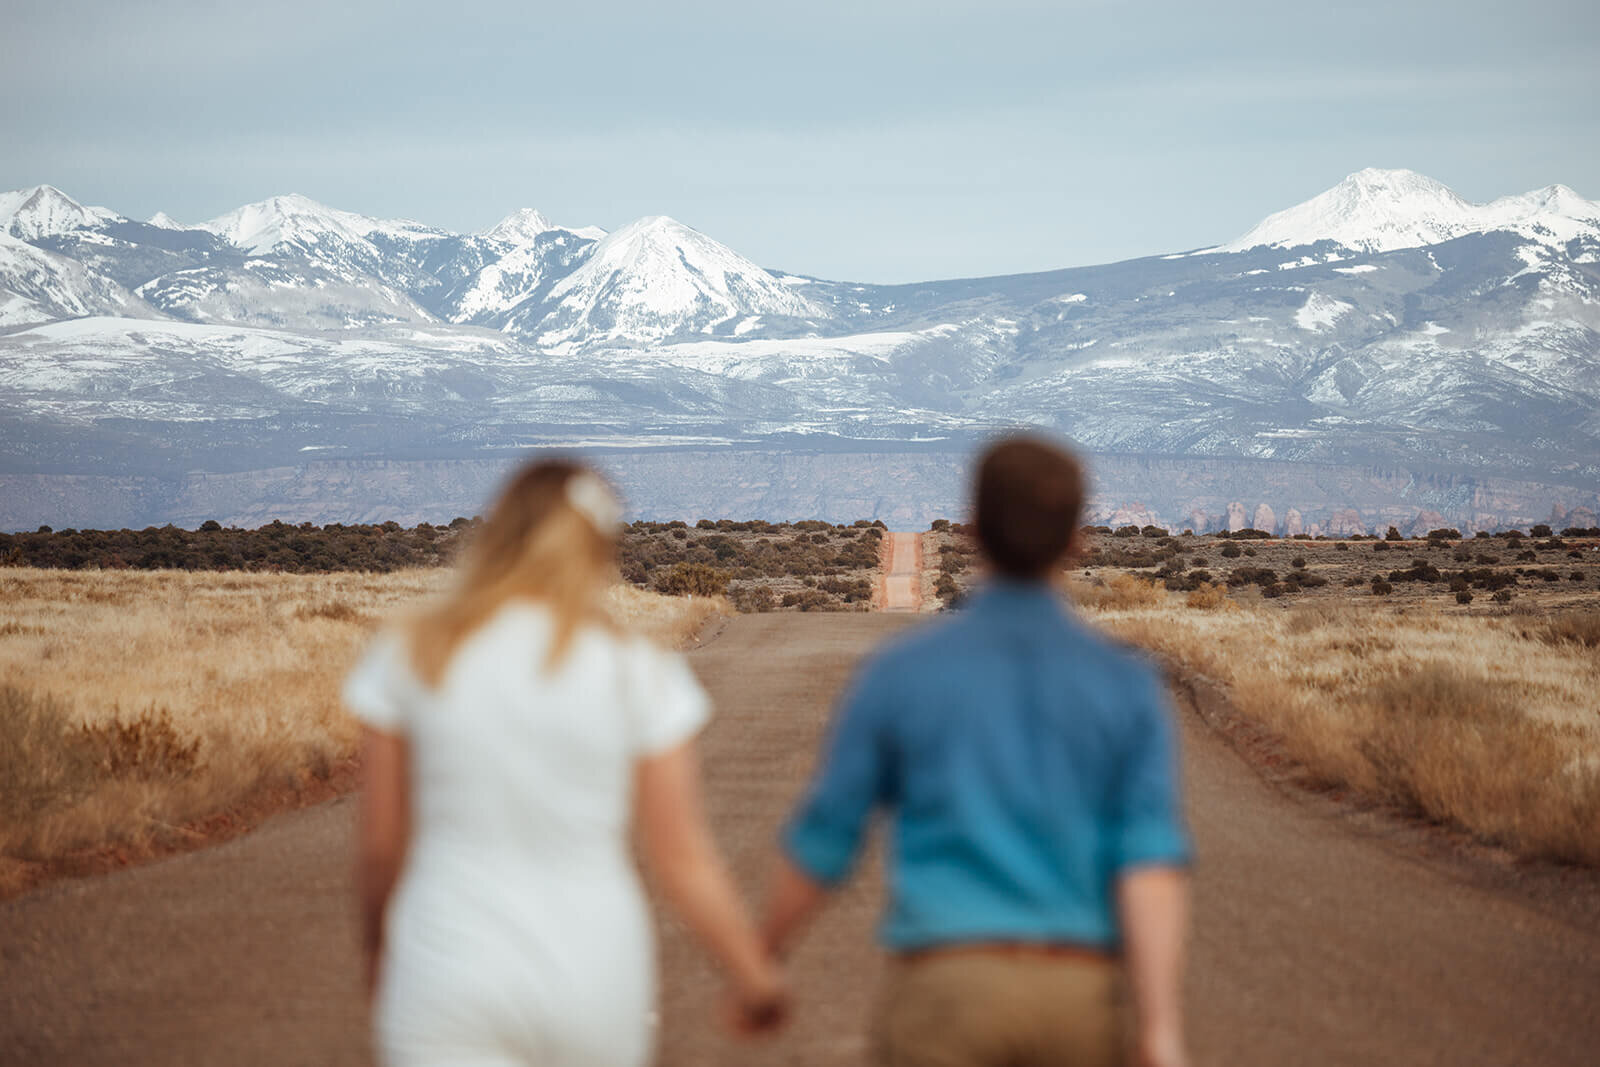  Couple celebrates anniversary at Dead Horse Point State Park and the La Sal Mountains near Moab, Utah with incredible views and hiking. Utah engagement photographer 